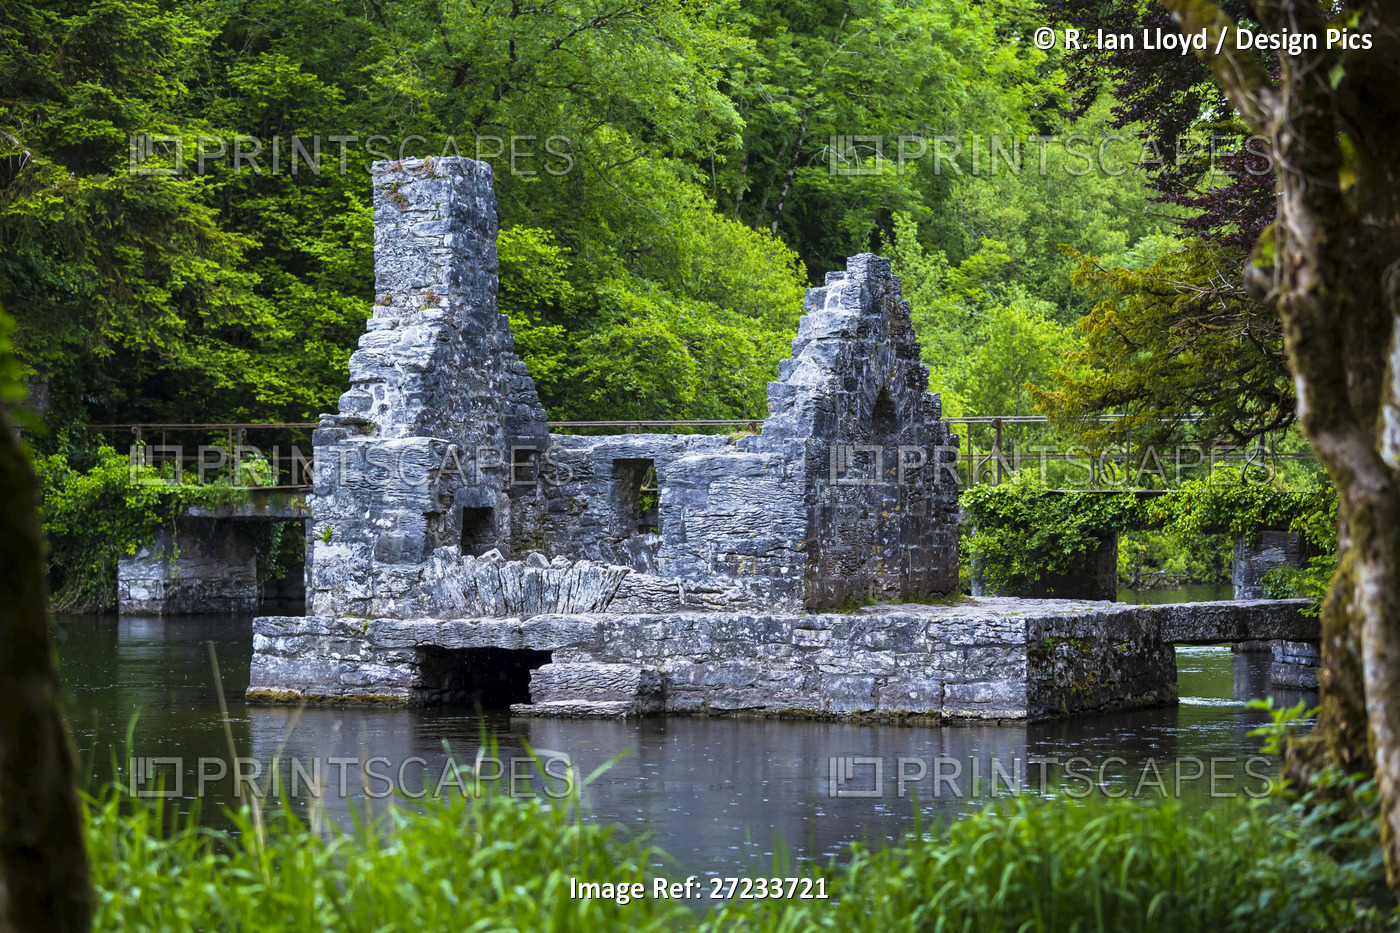 Ruins of The Monks's Fishing House, Cong Abbey, Cong, County Mayo, Ireland